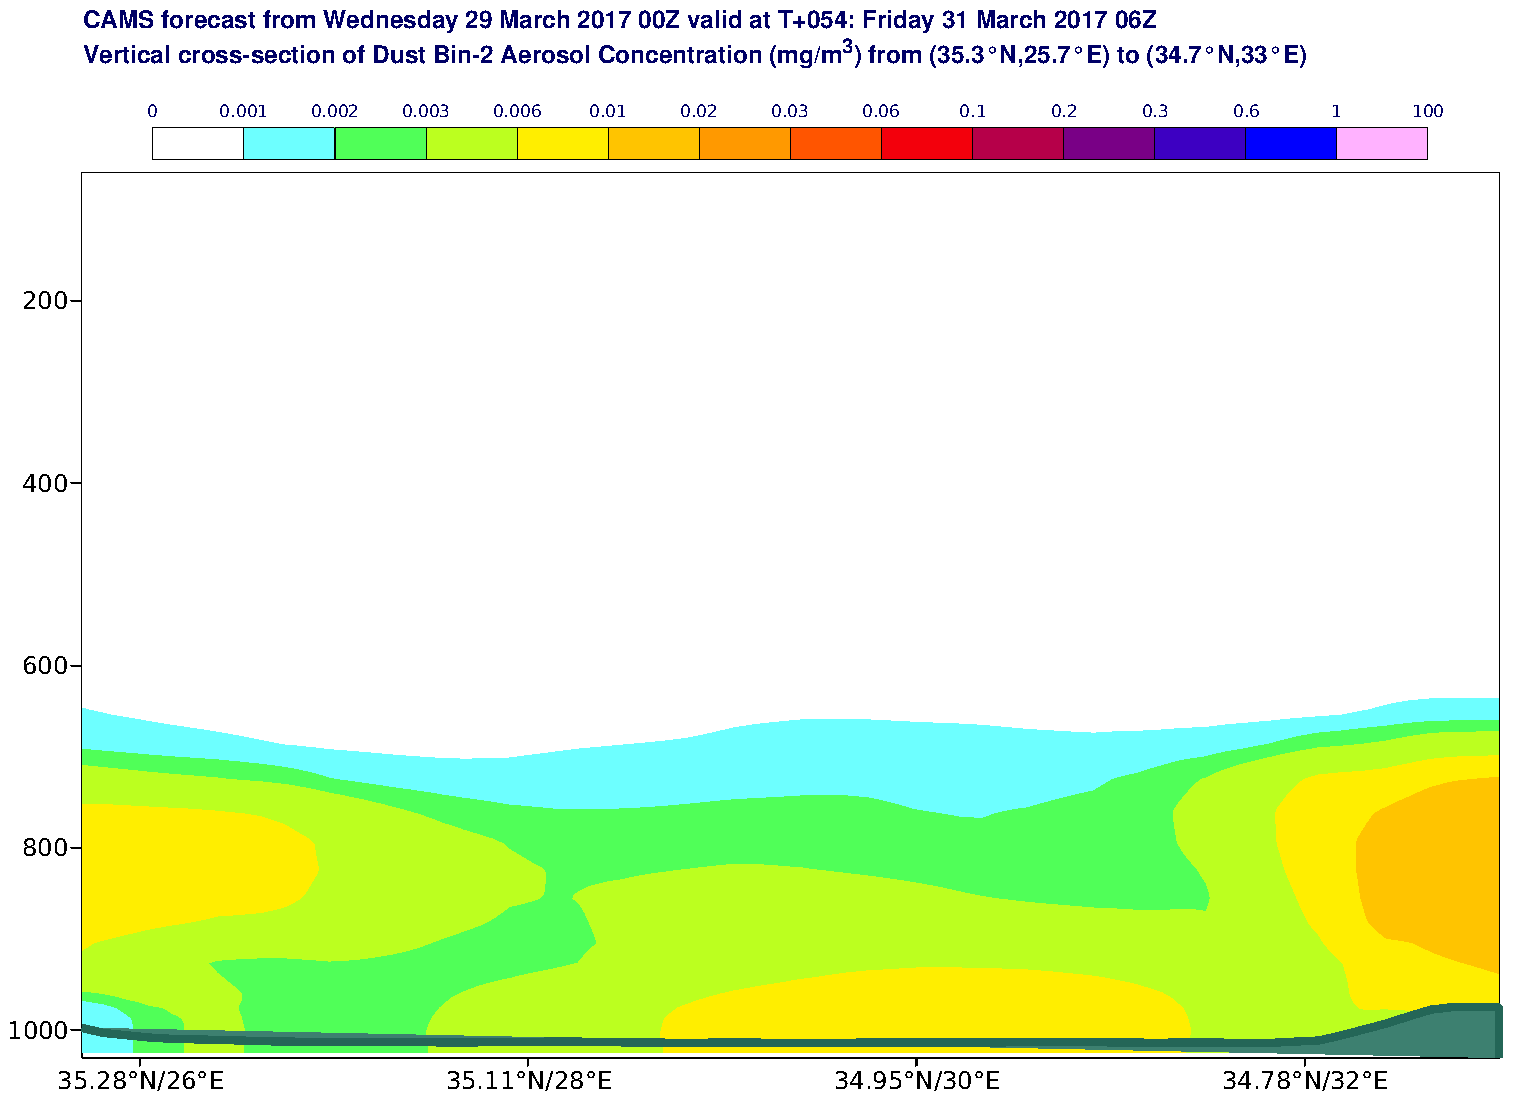 Vertical cross-section of Dust Bin-2 Aerosol Concentration (mg/m3) valid at T54 - 2017-03-31 06:00